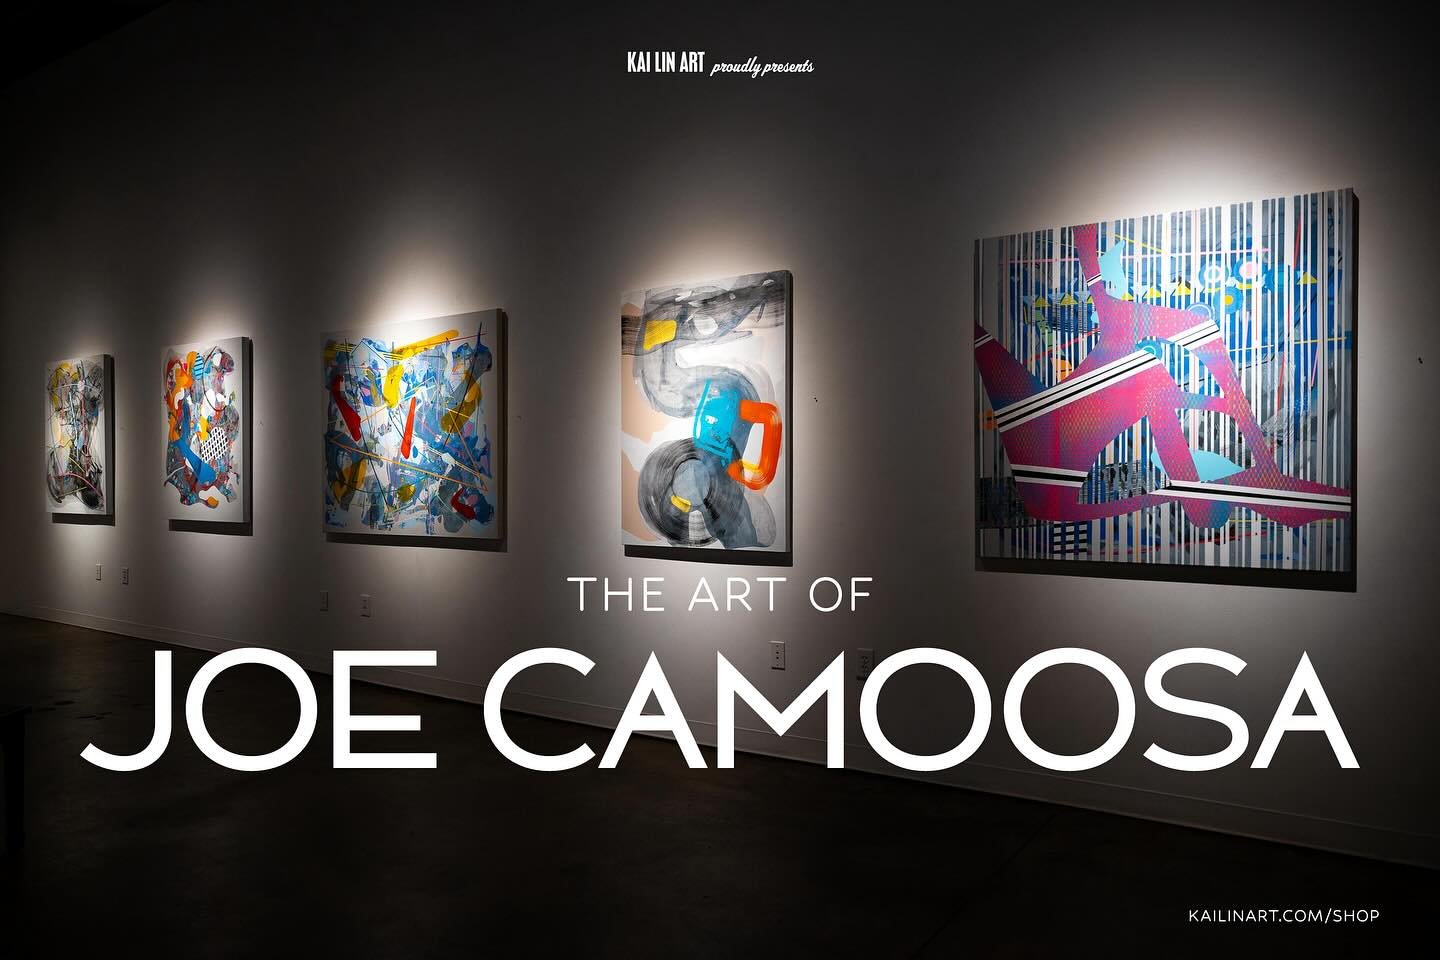 We are pleased to share with you our latest collection of nine new works from resident Kai Lin Artist, Joe Camoosa.

https://www.kailinart.com/news/the-art-of-joe-camoosa

In this body of work, Camoosa explores patterning and layering, color theory a